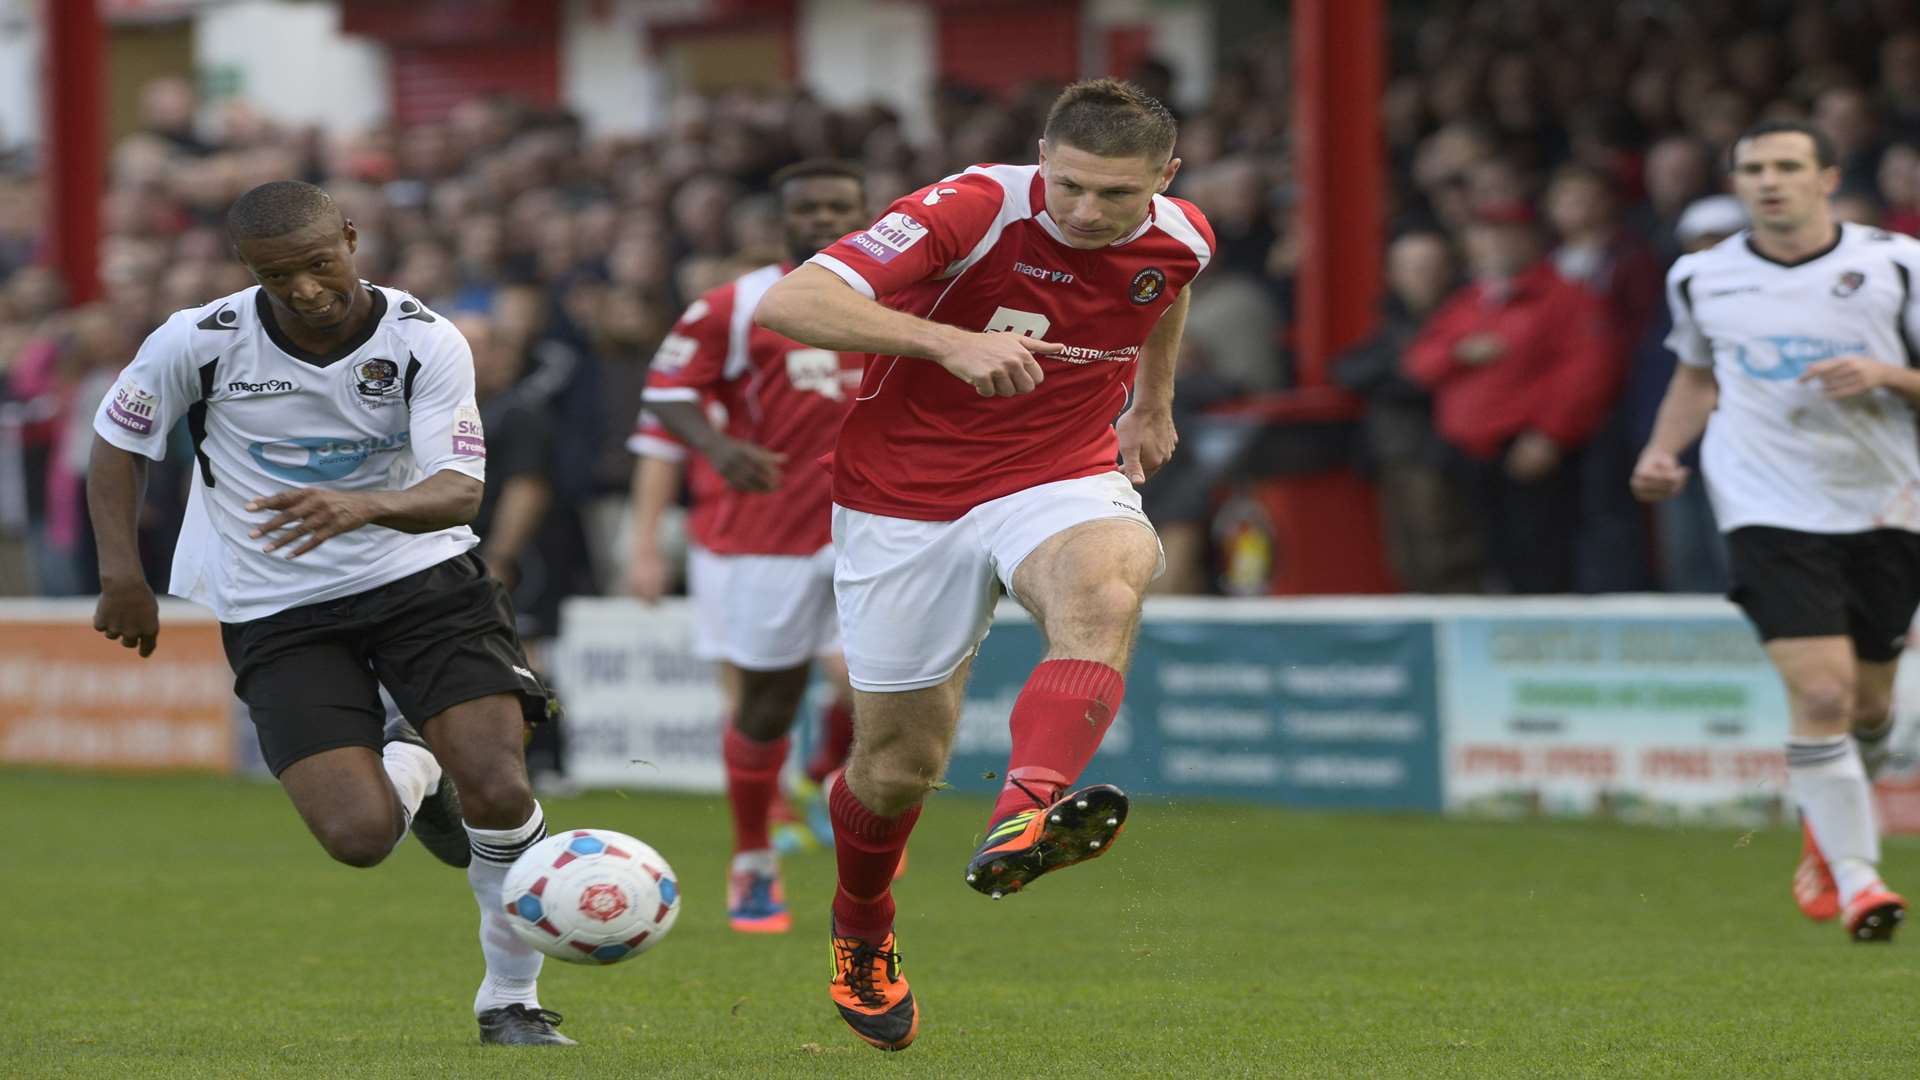 Paul Lorraine in action for Ebbsfleet against Dartford in 2013 Picture: Andy Payton